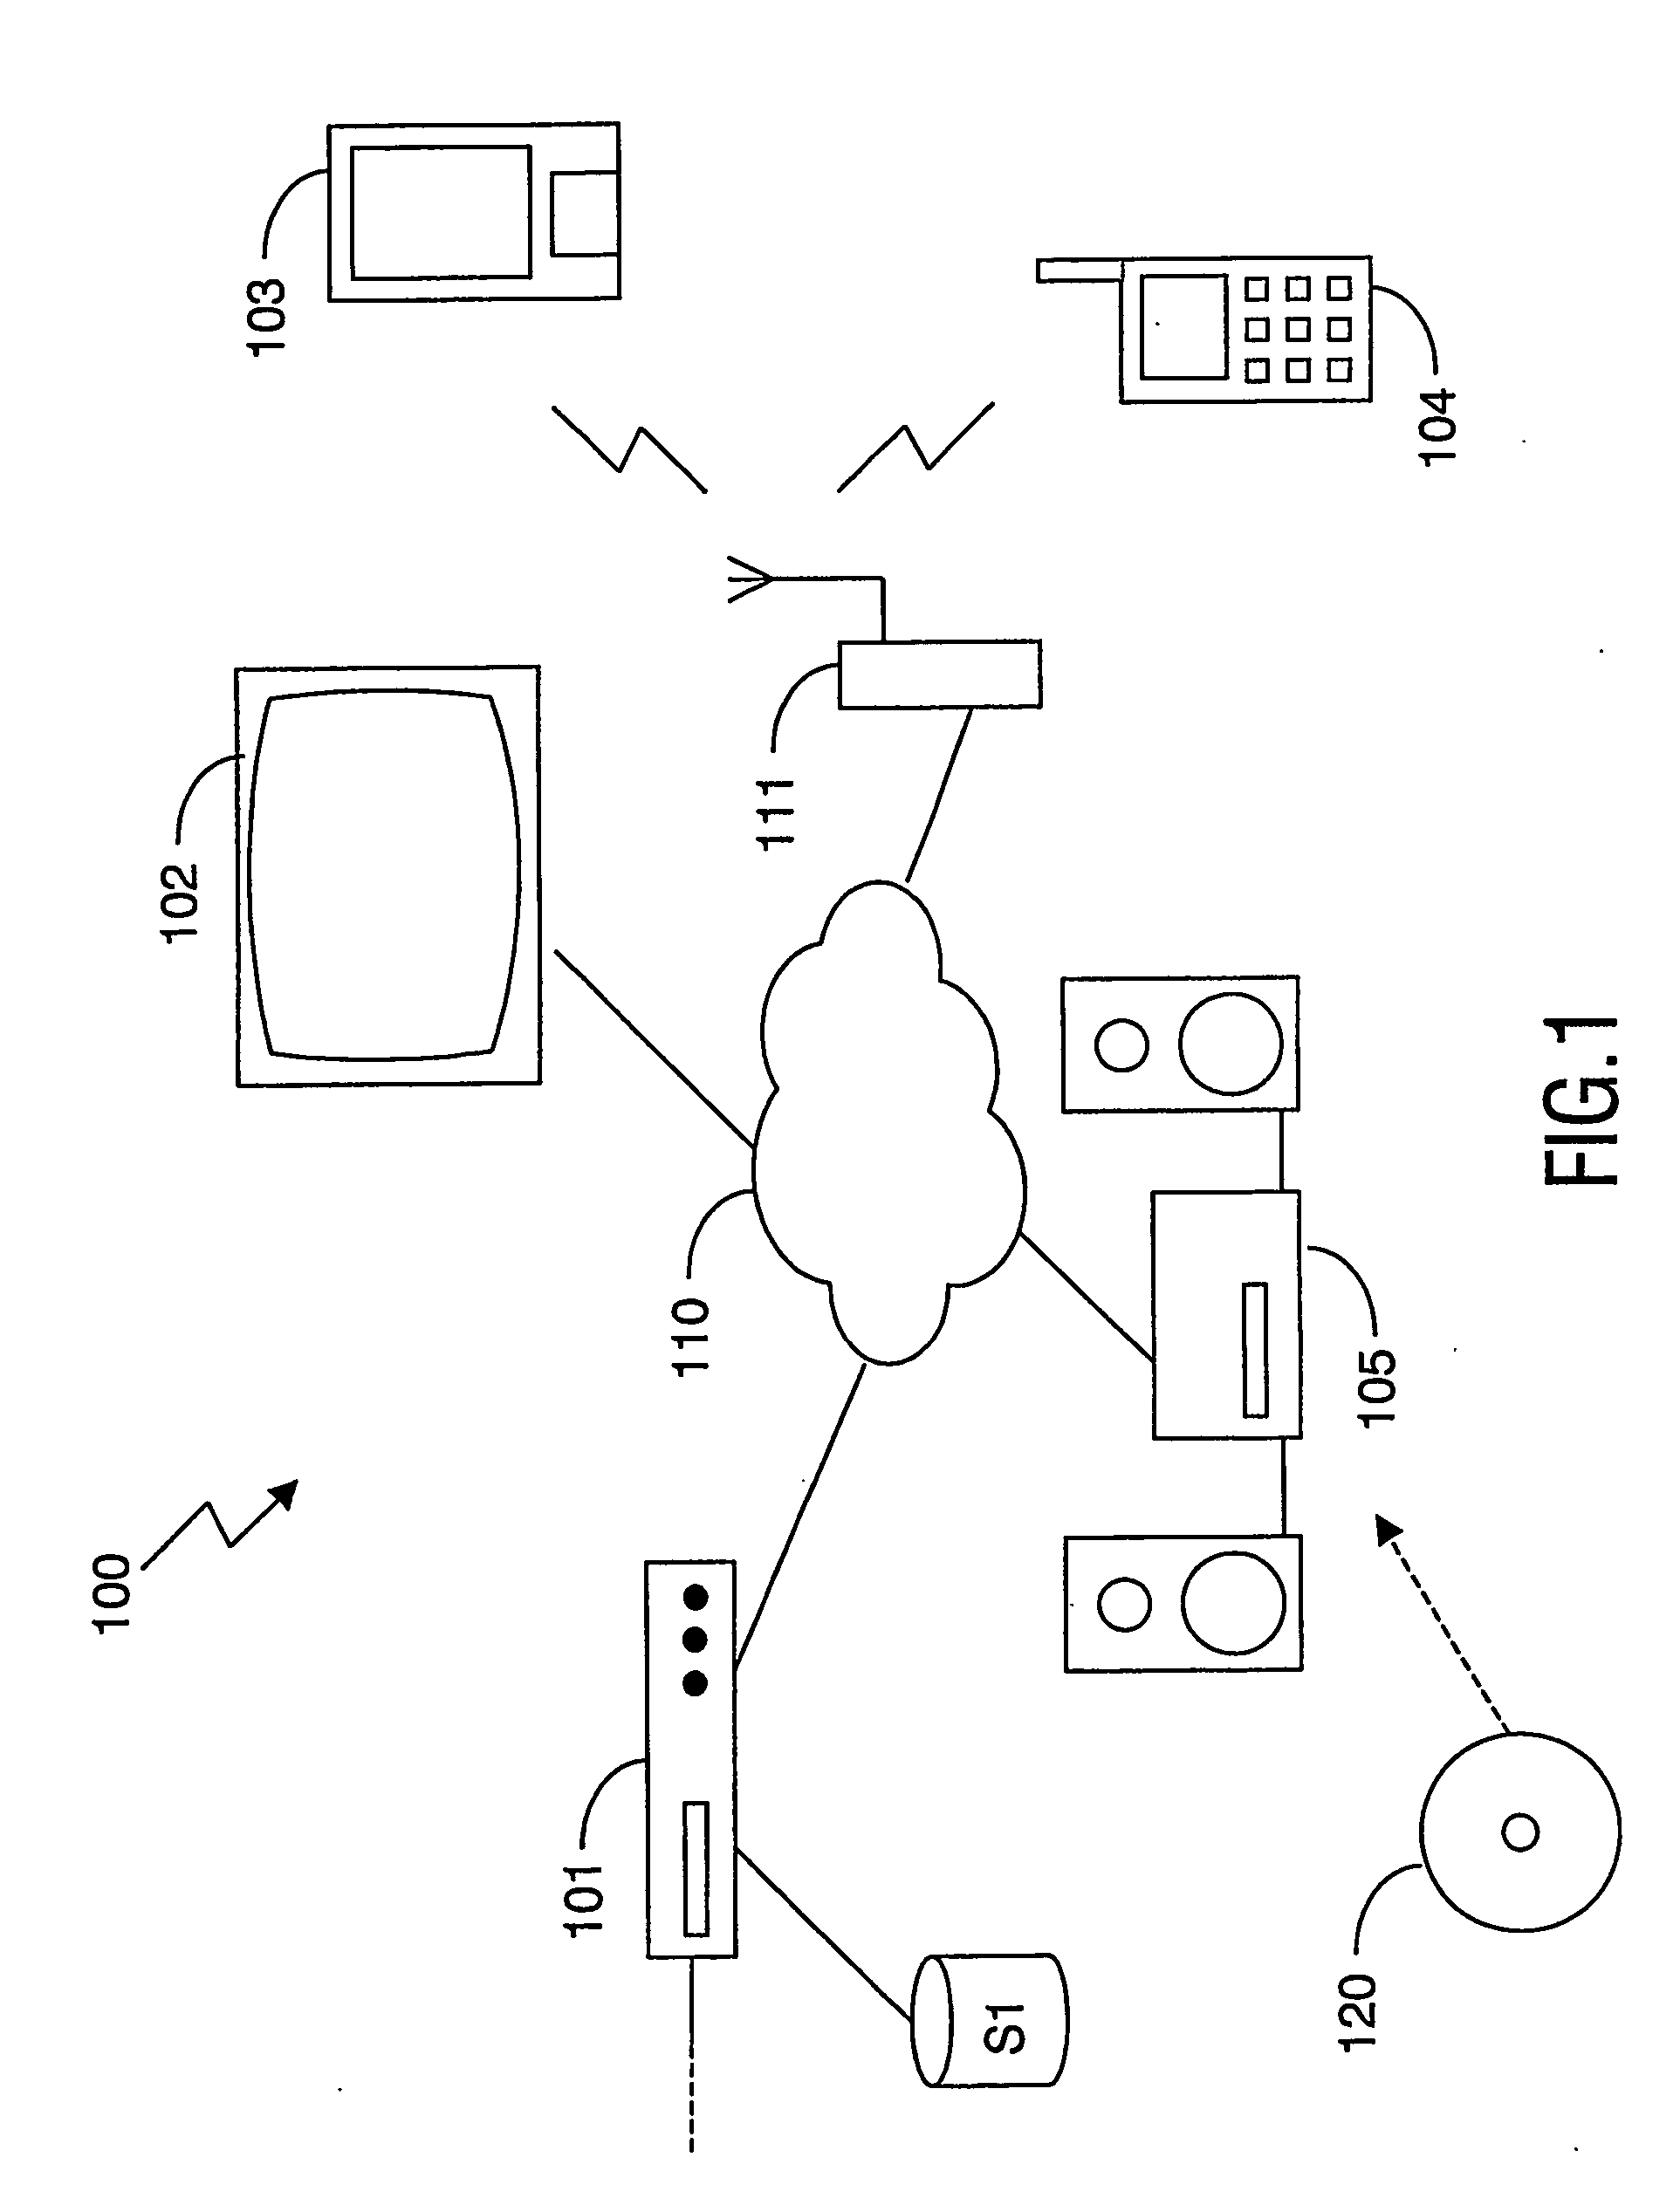 System for authentication between devices using group certificates